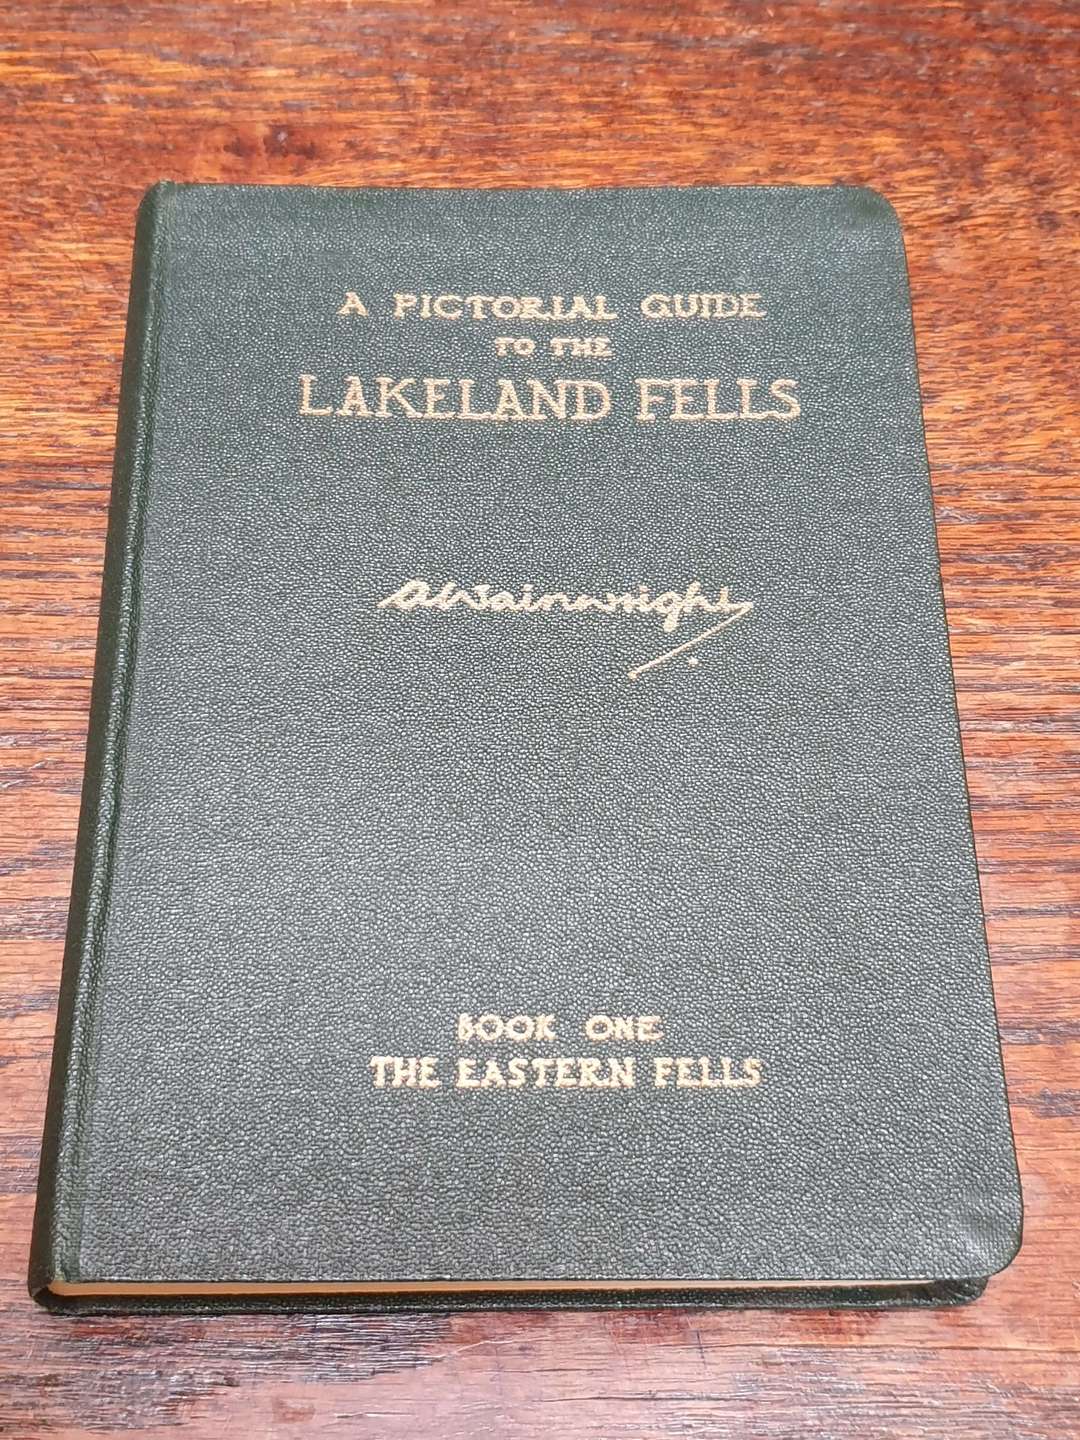 The Guidebook That Started It All